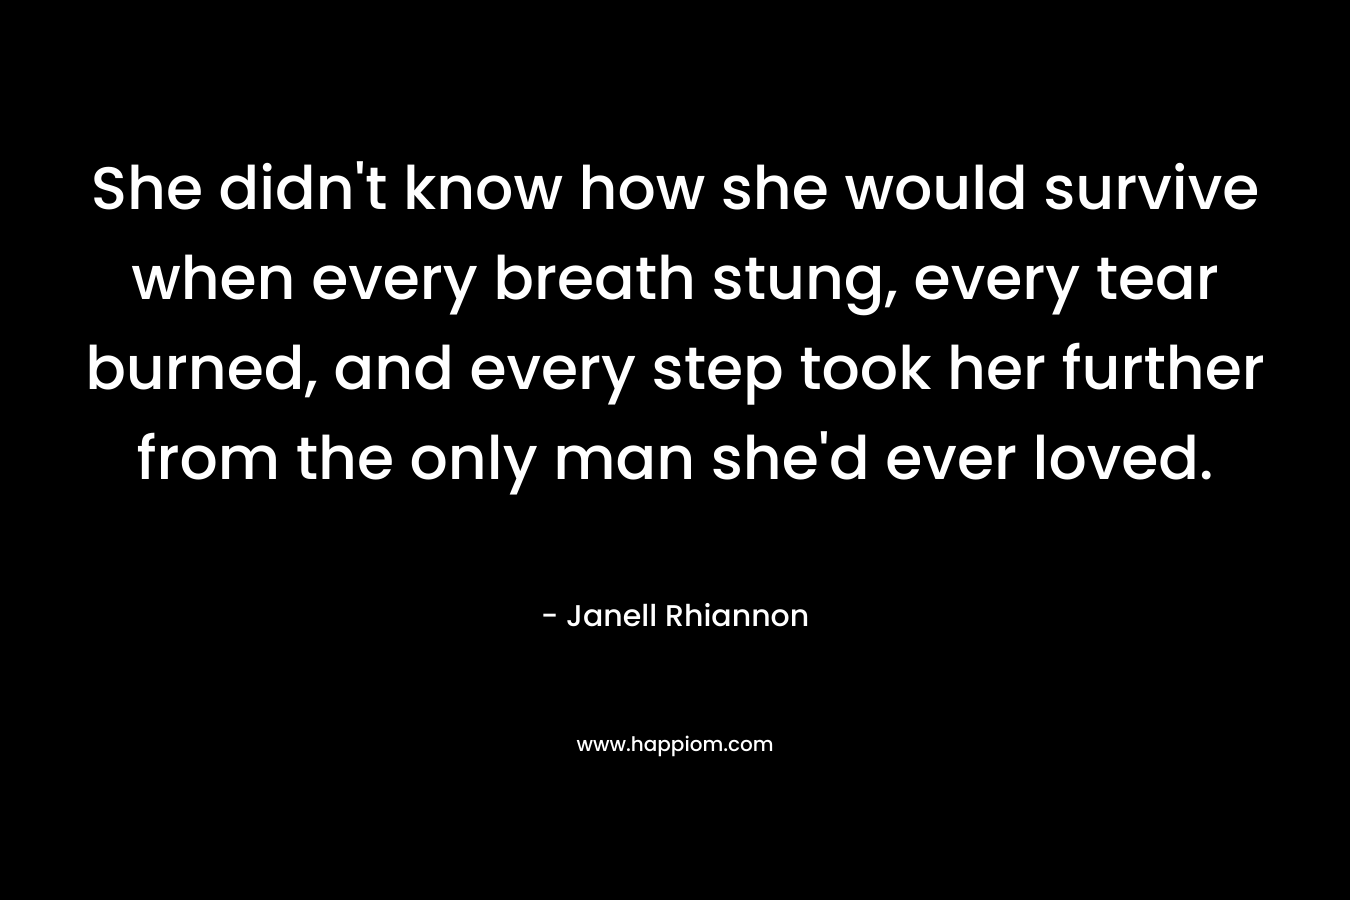 She didn’t know how she would survive when every breath stung, every tear burned, and every step took her further from the only man she’d ever loved. – Janell Rhiannon